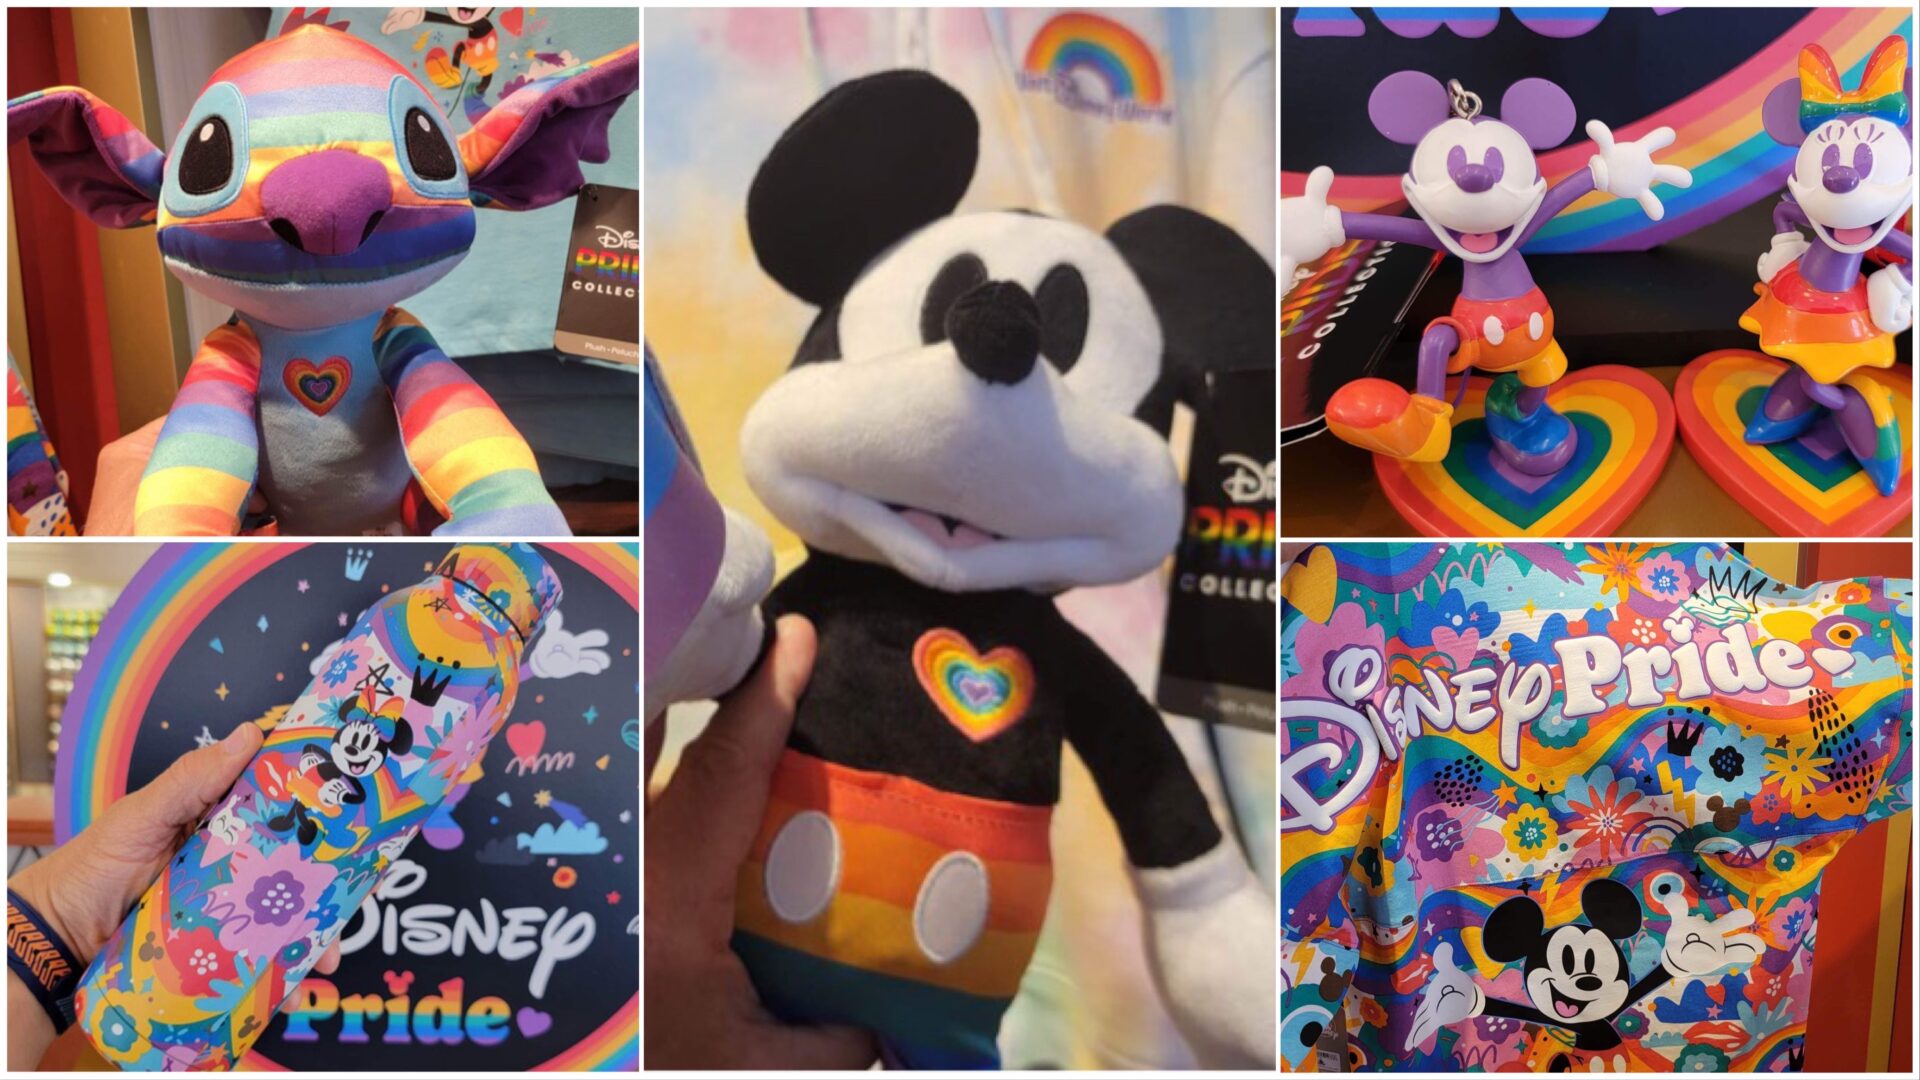 New Disney Pride Collection Now At Disney Parks!